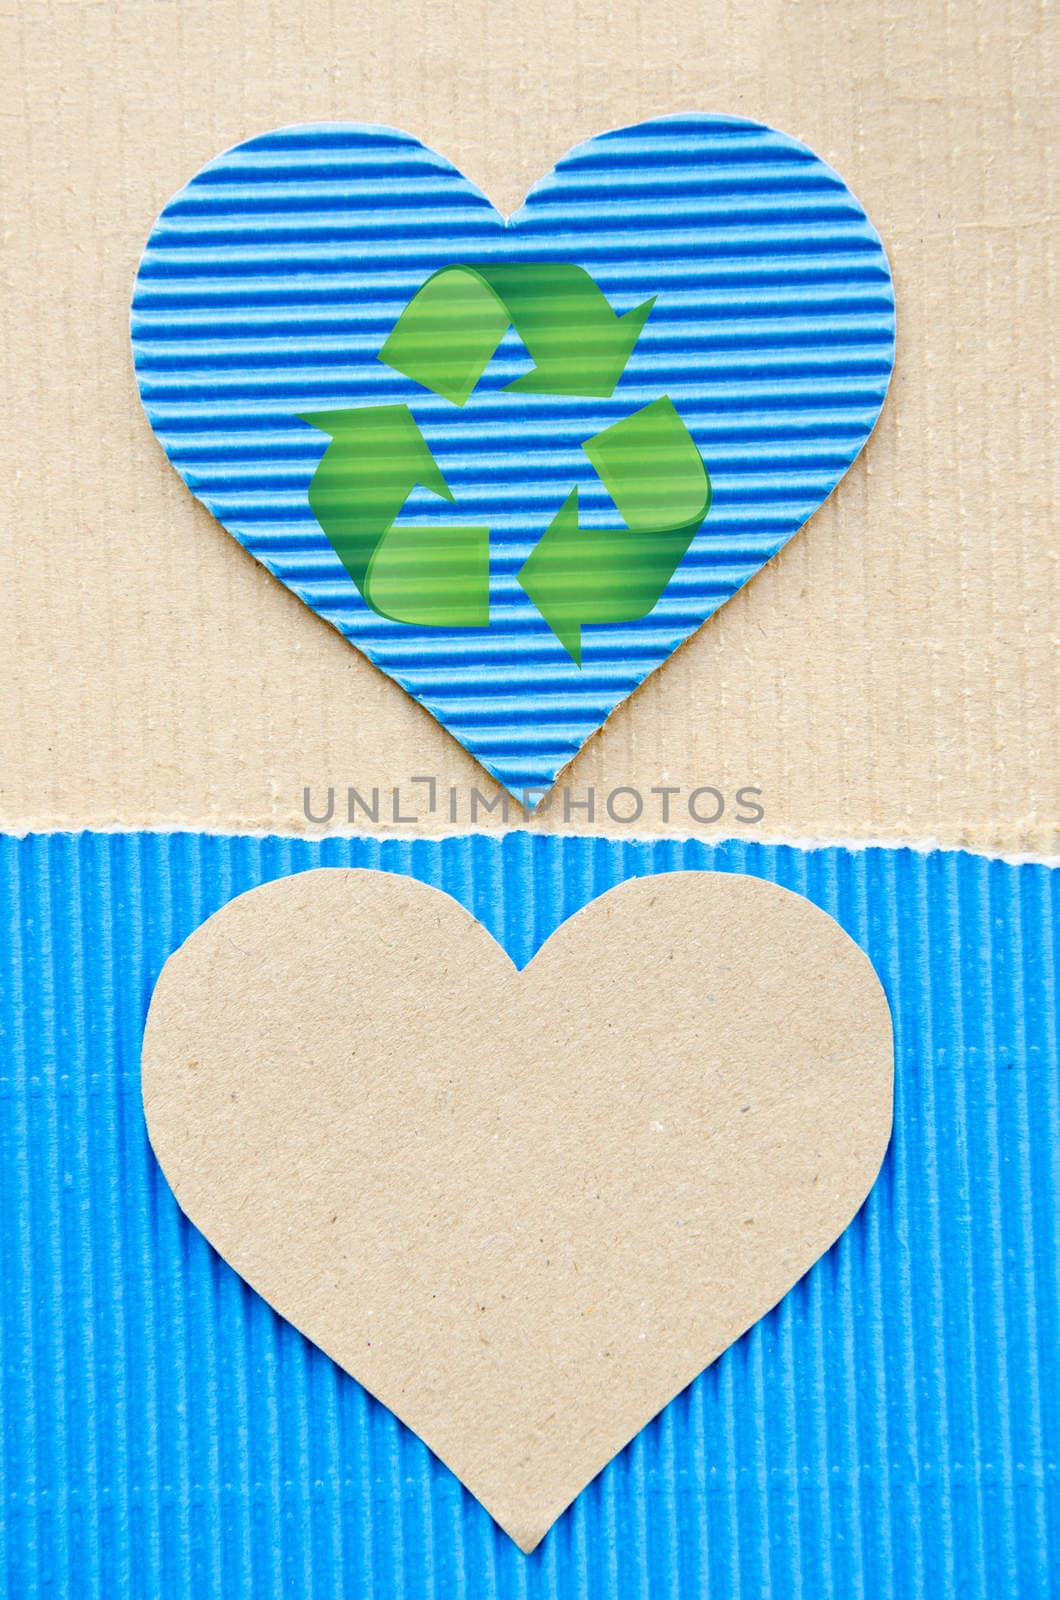 heart blue corrugated paper and sign recycle. recycle paper concept.